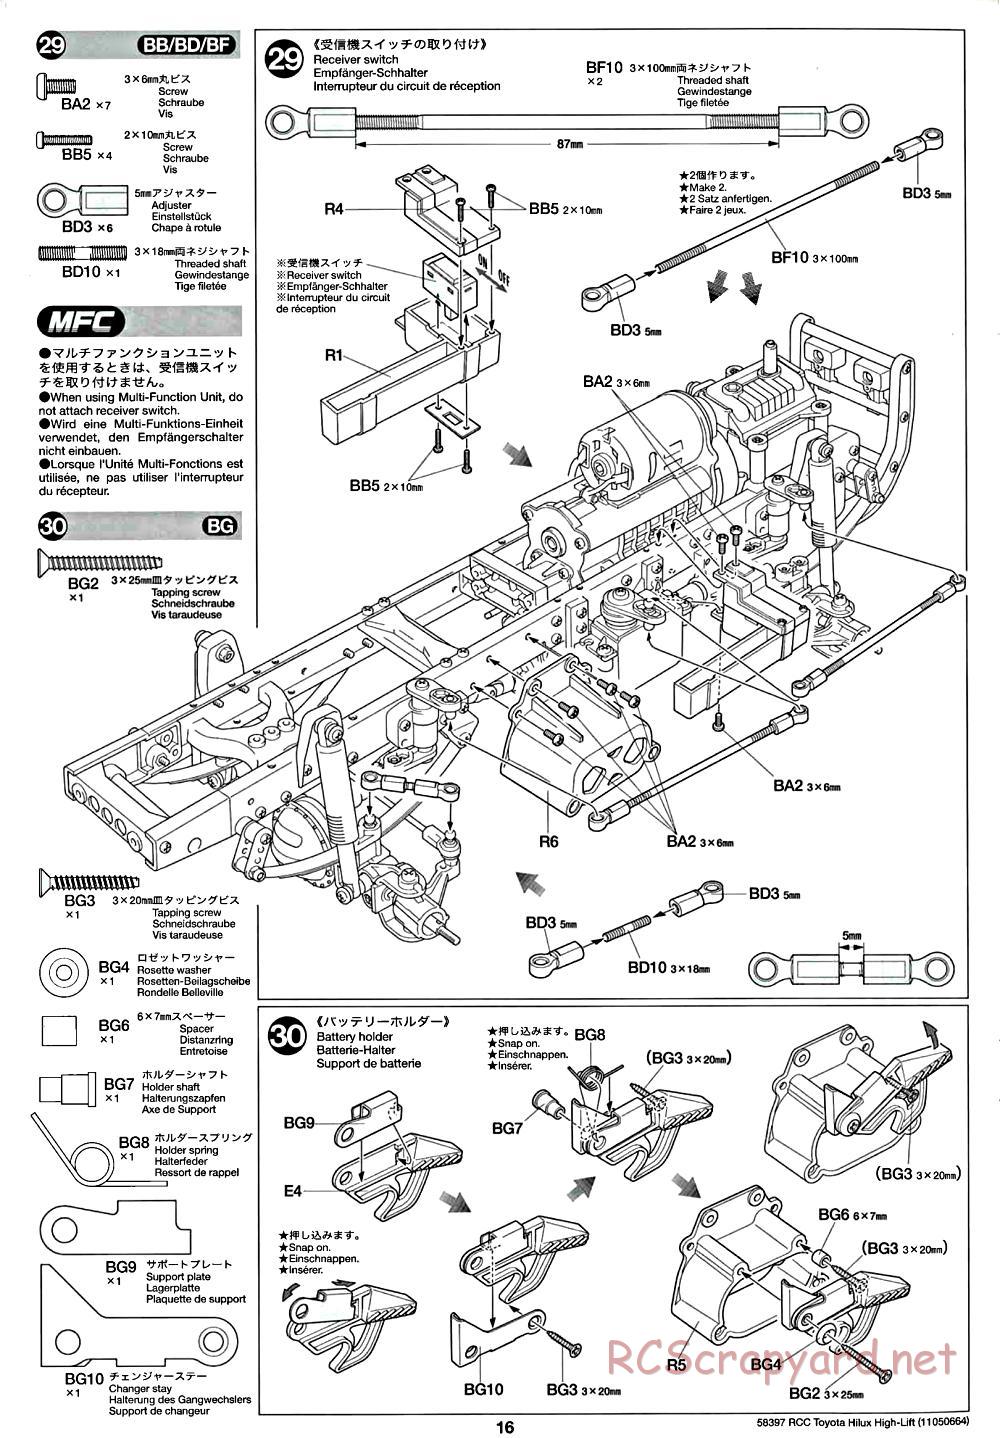 Tamiya - Toyota Hilux High-Lift Chassis - Manual - Page 16